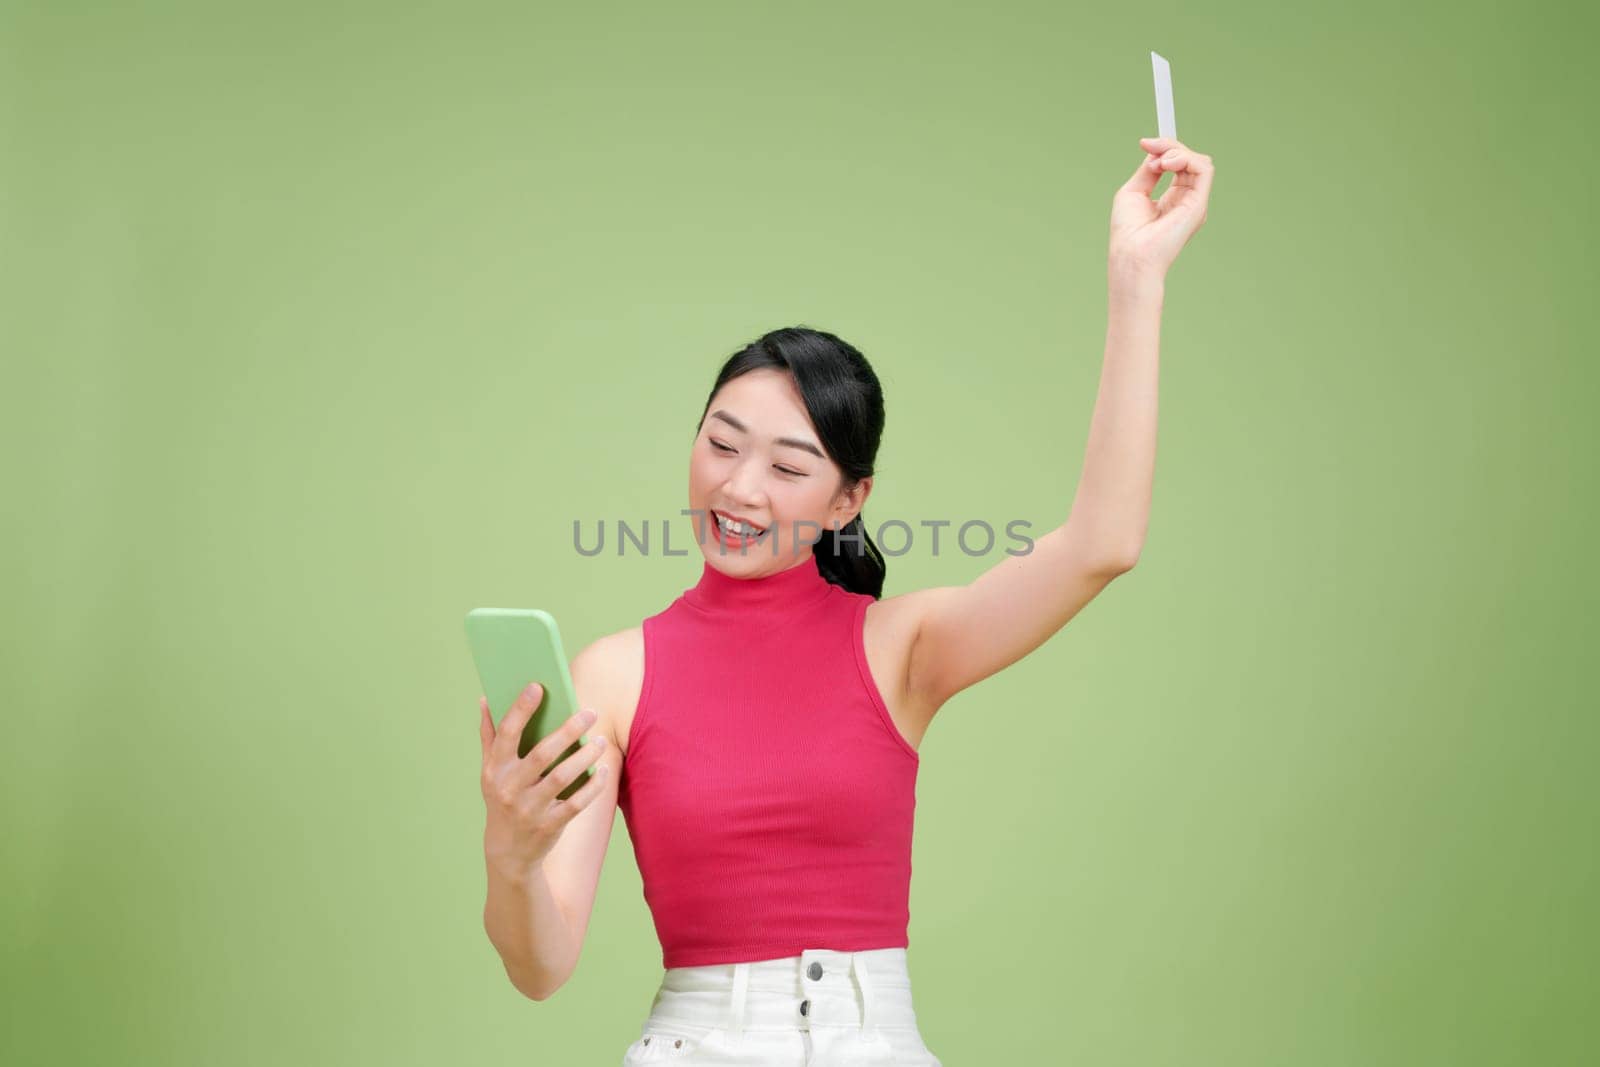 Smiling woman sitting on podium showing credit card and holding smartphone in another hand by makidotvn